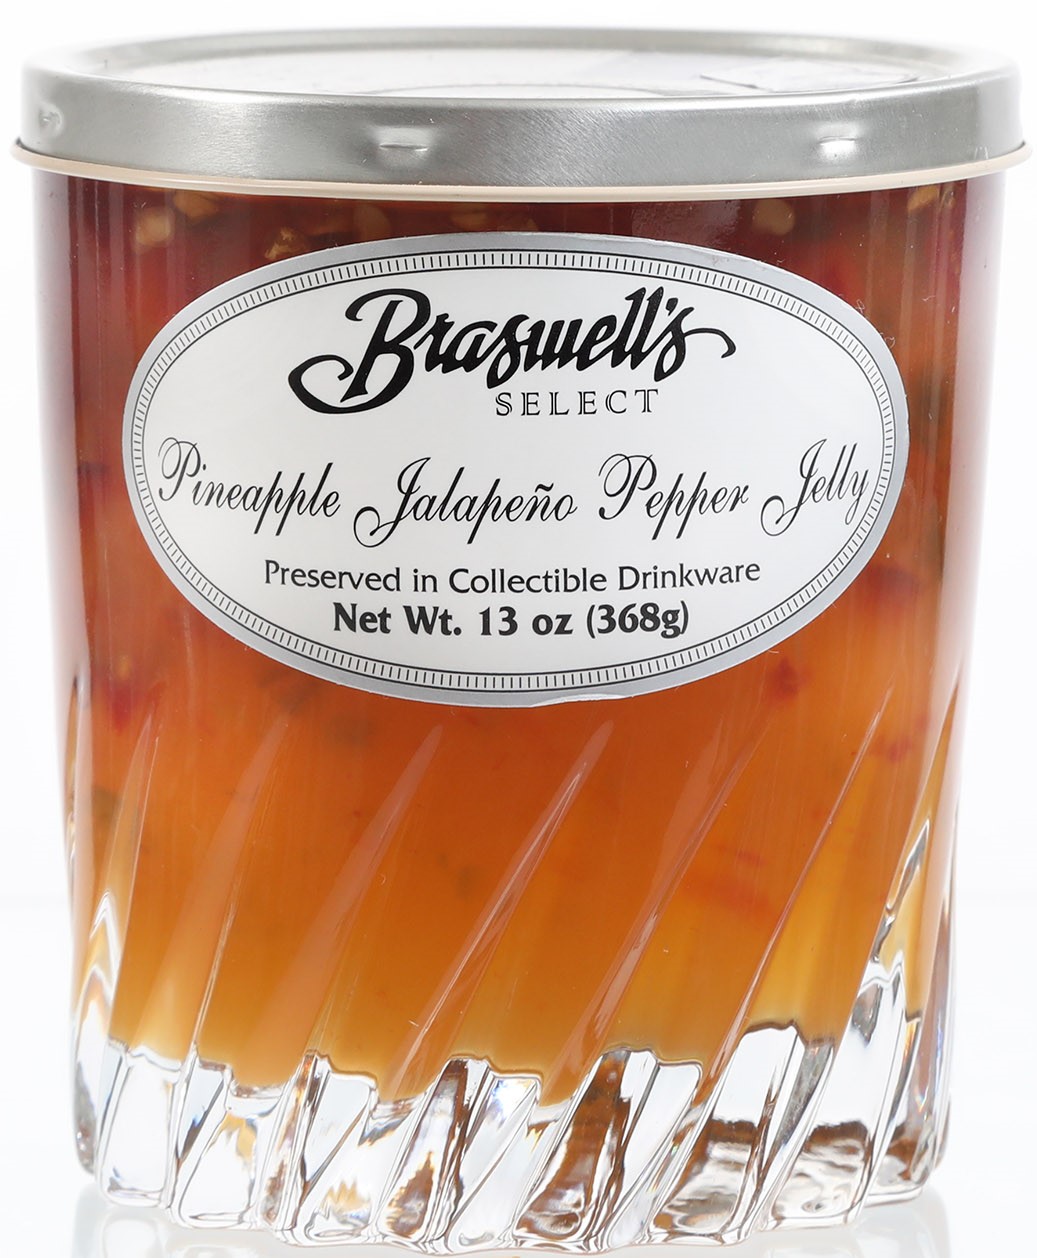 Braswell's Select Pineapple Jalapeno Pepper Jelly 13 oz